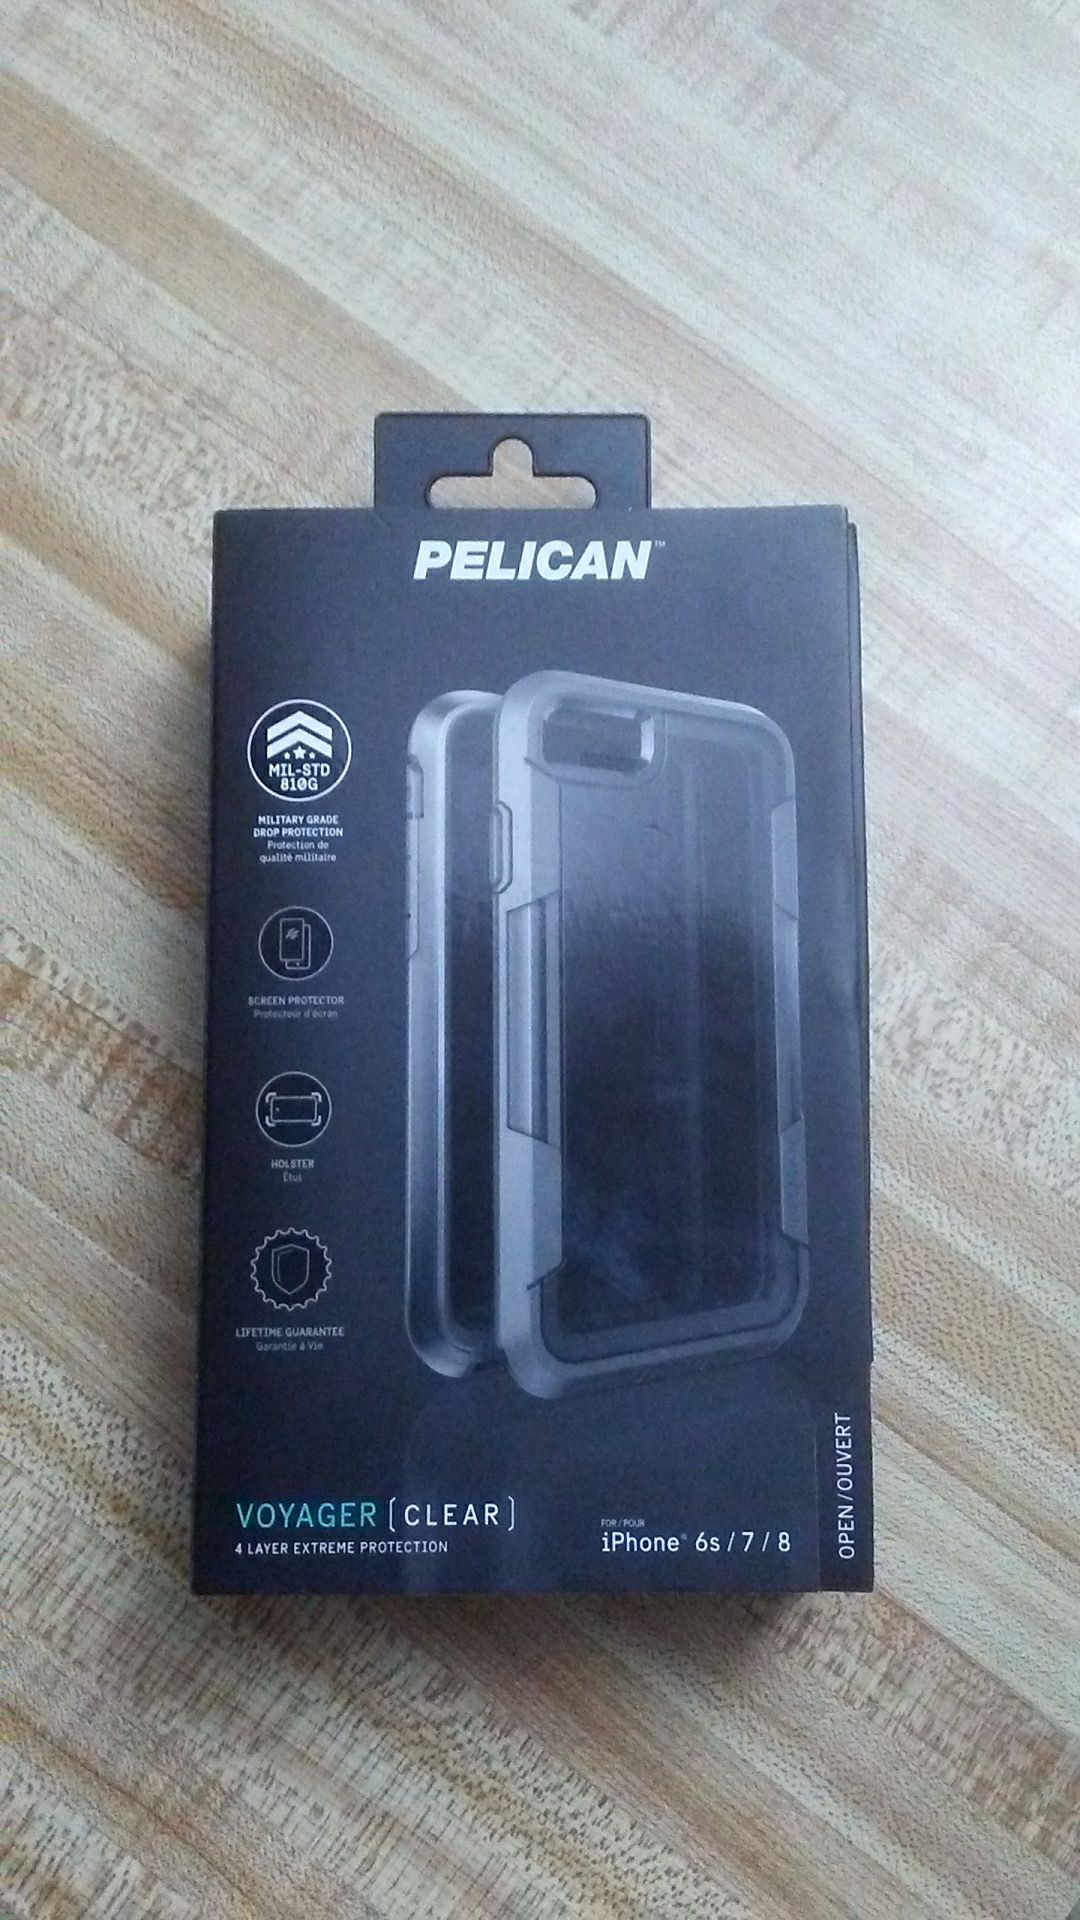 Pelican Military Grade Iphone Case for Iphone 6s,7, &8